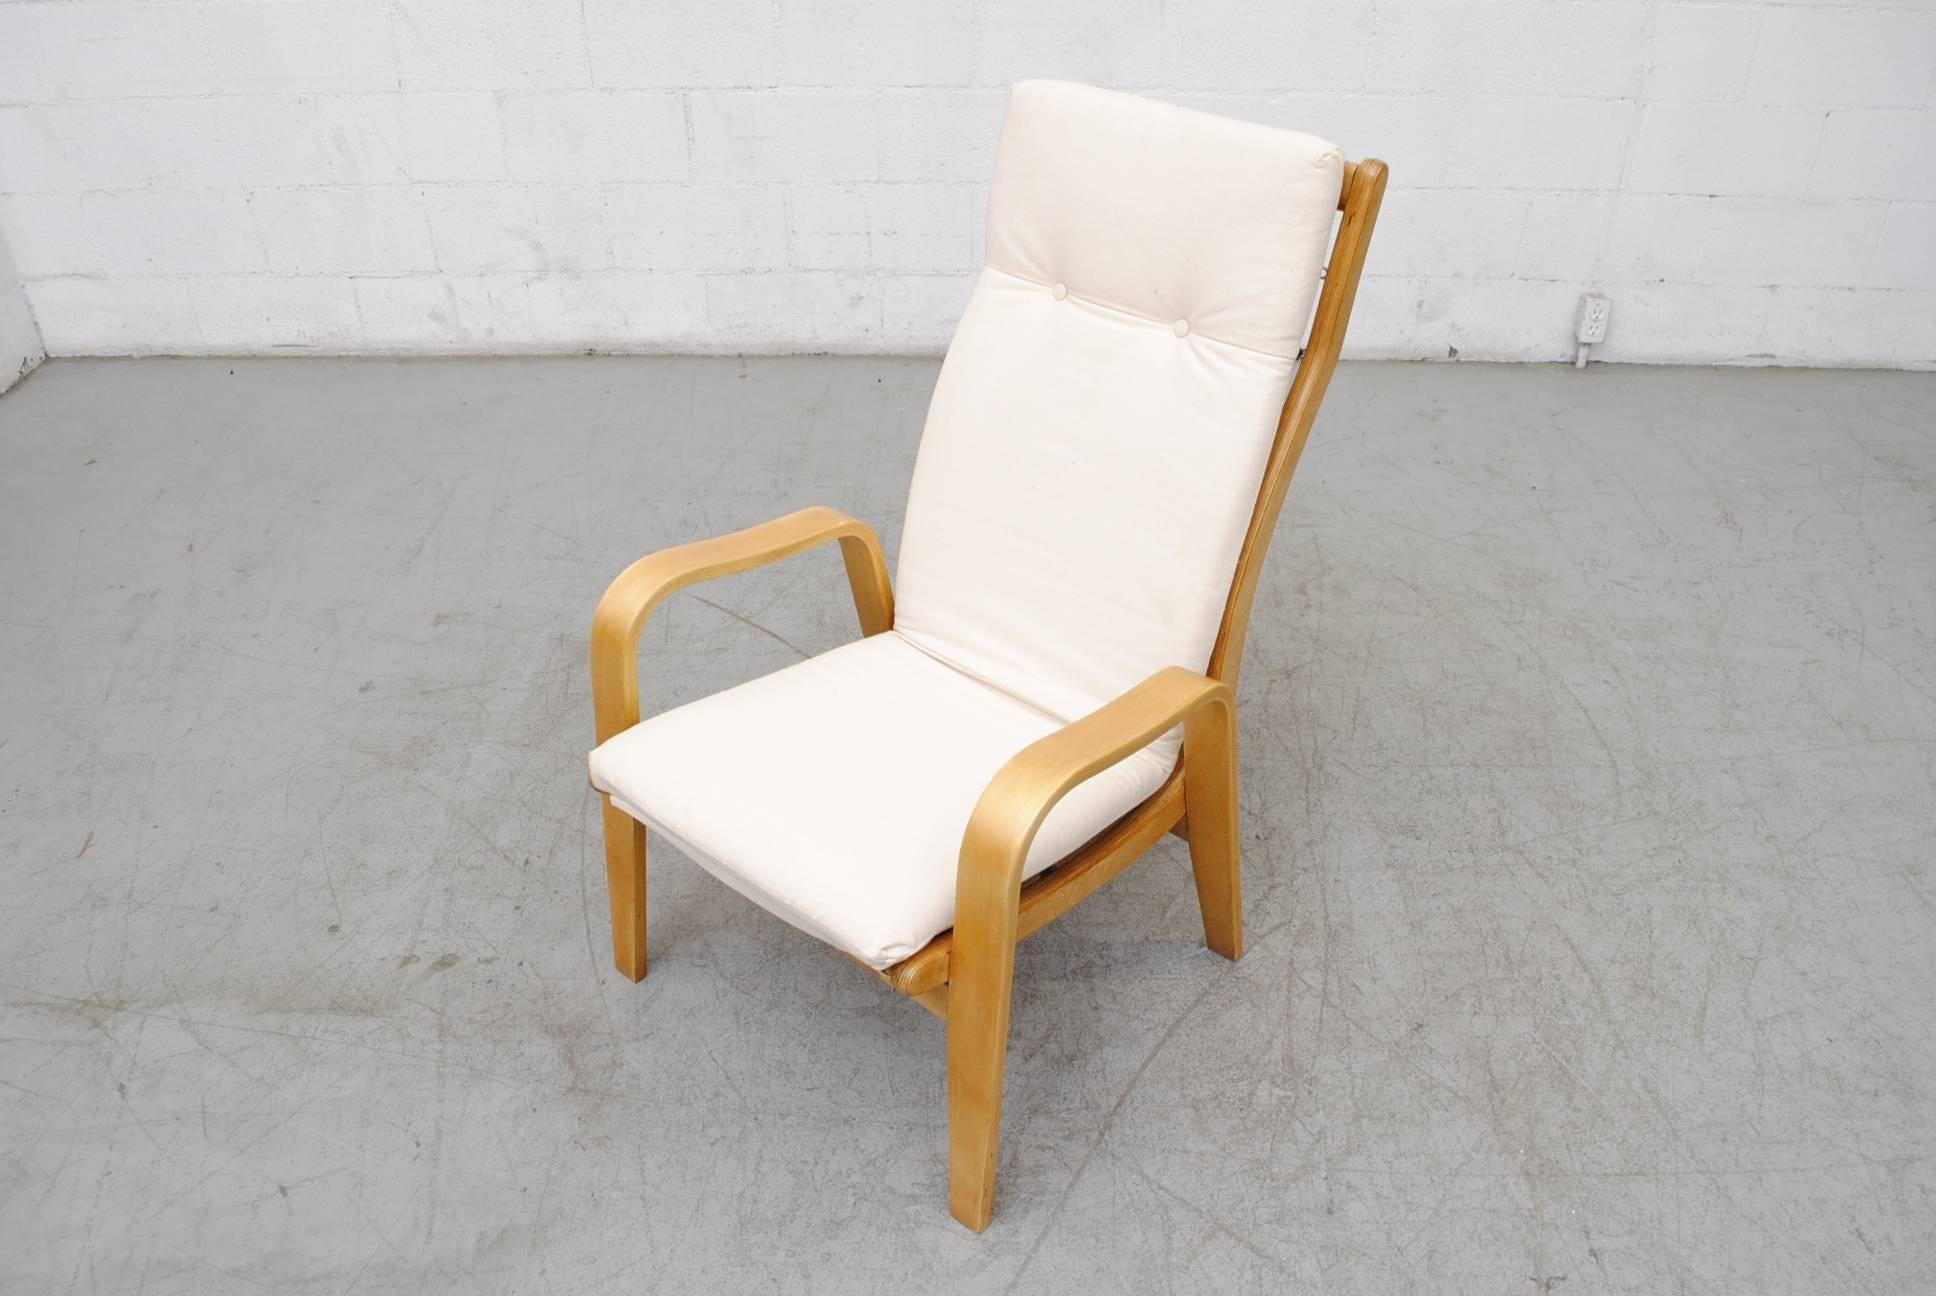 Birch Pair of Alvar Aalto Style Bent Plywood Lounge Chairs by Pastoe